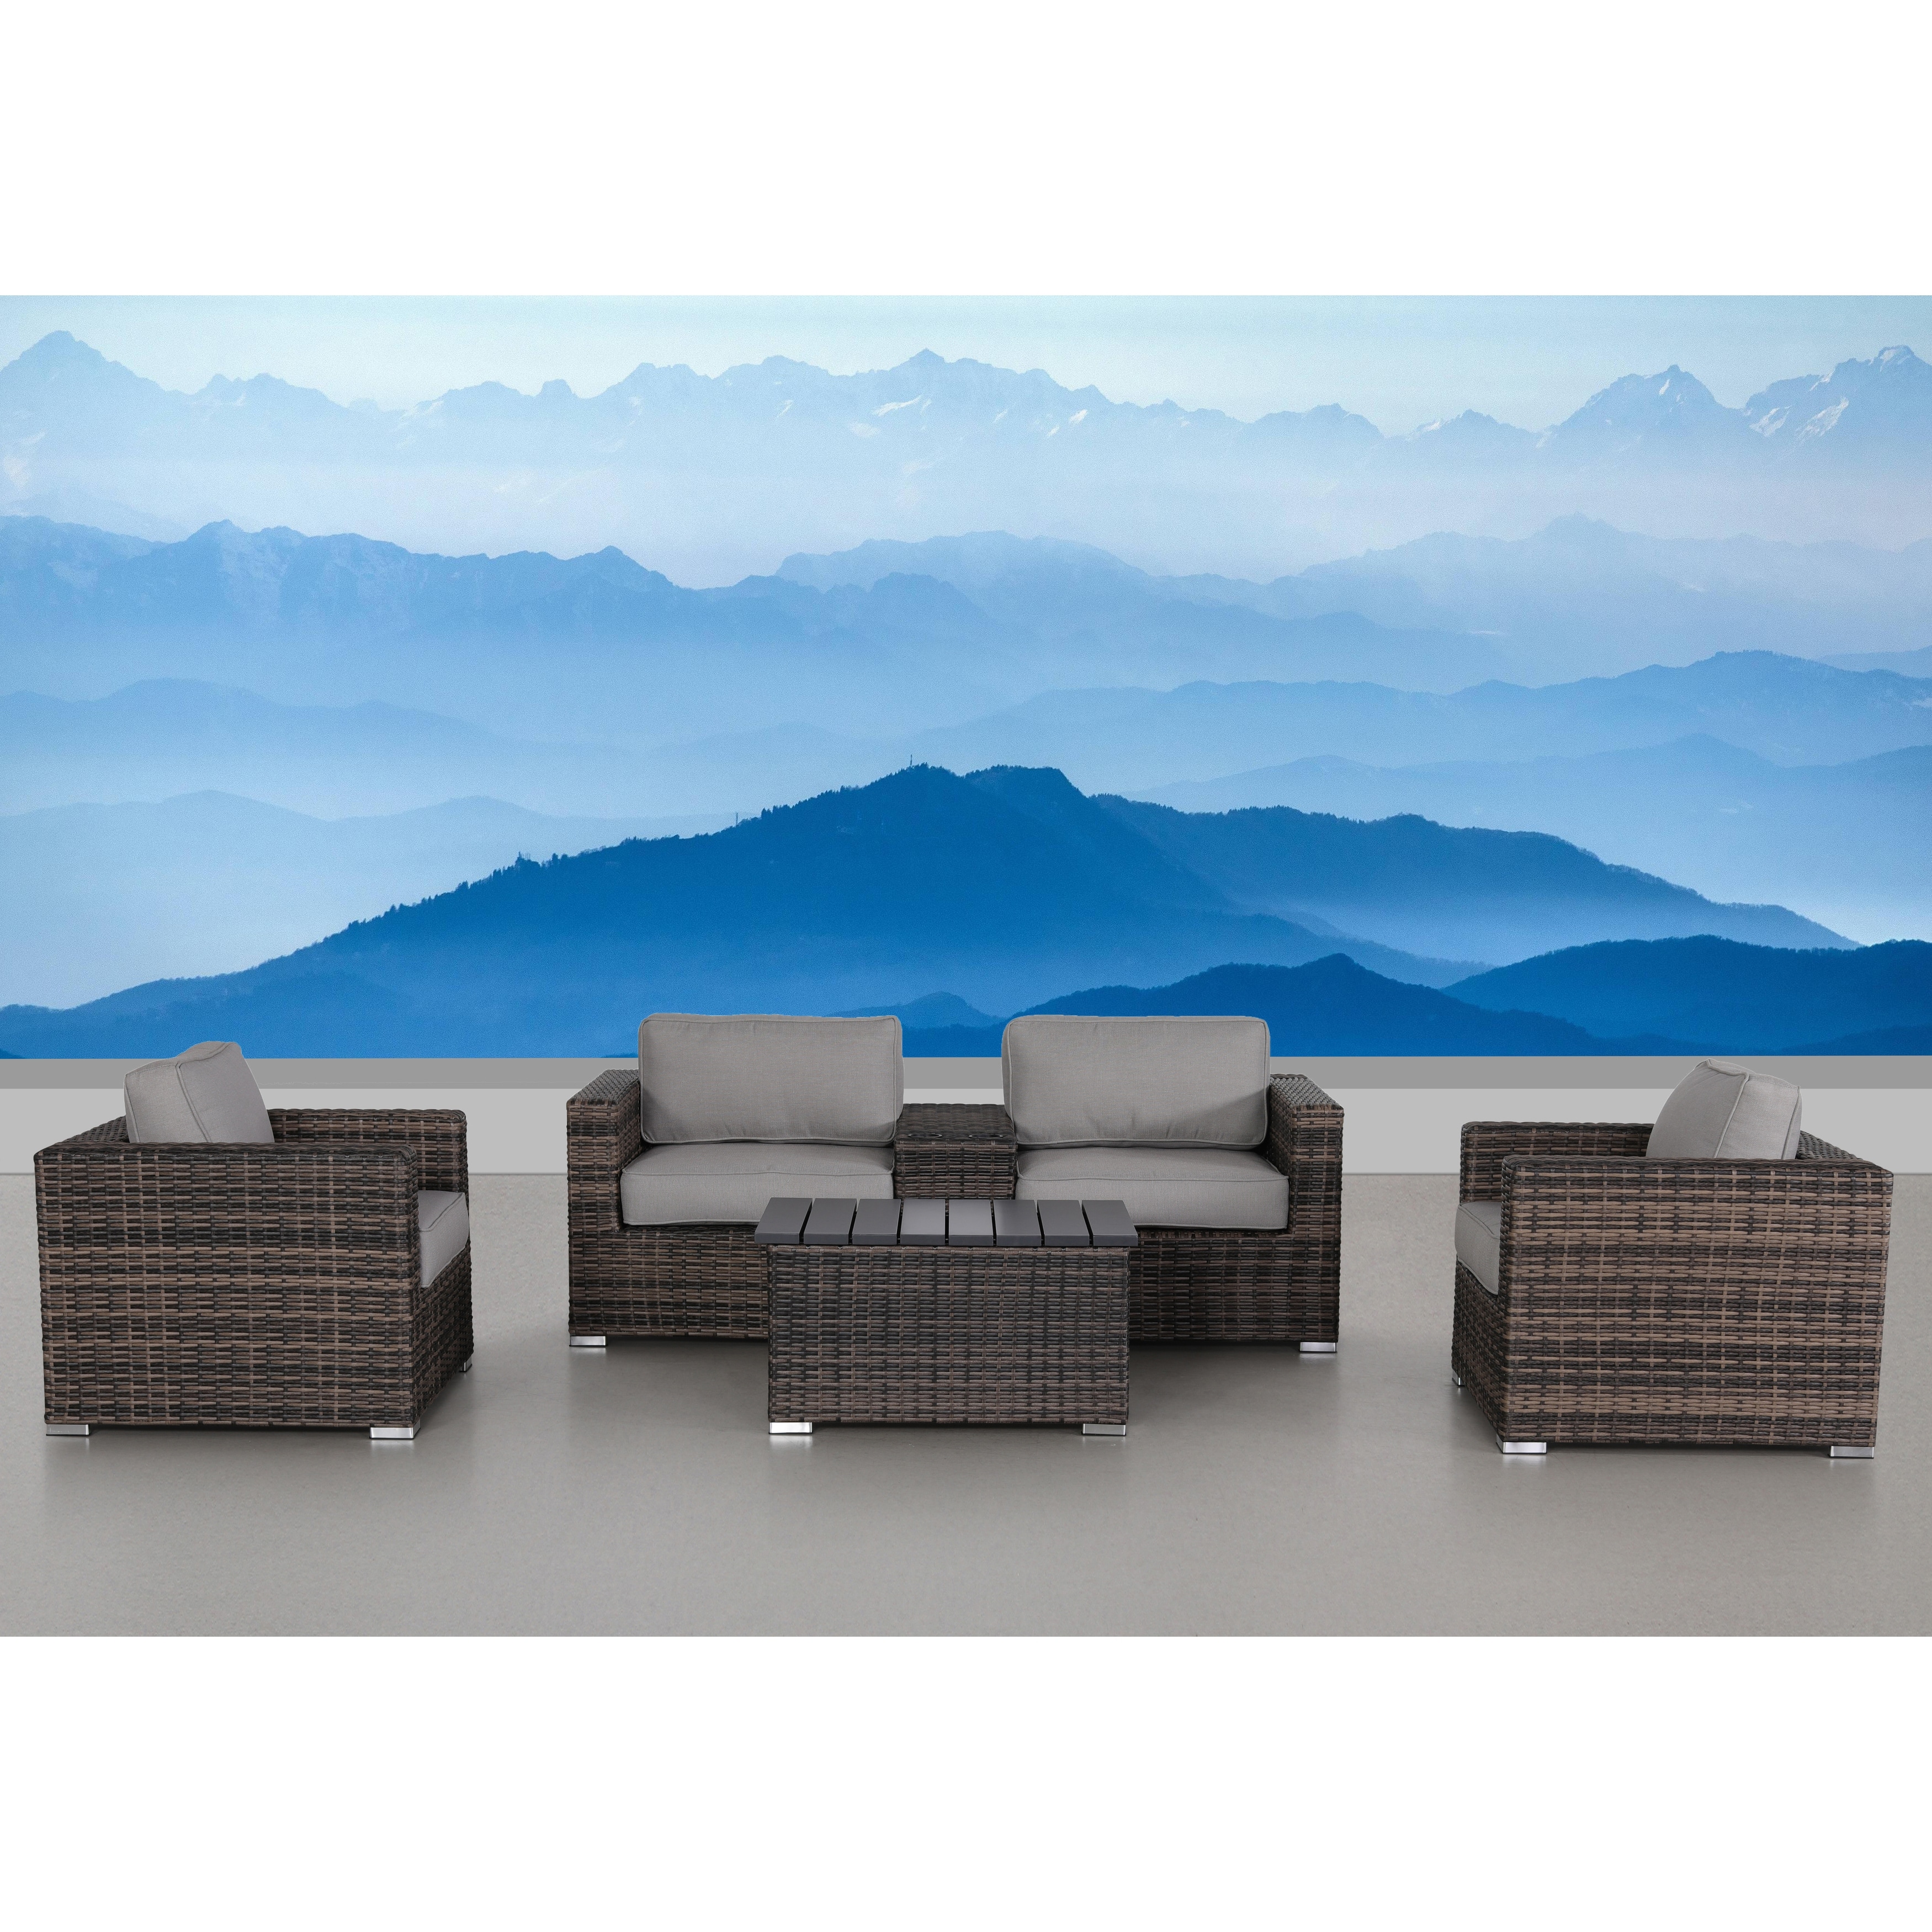 Lsi 6 Piece Sectional Seating Group